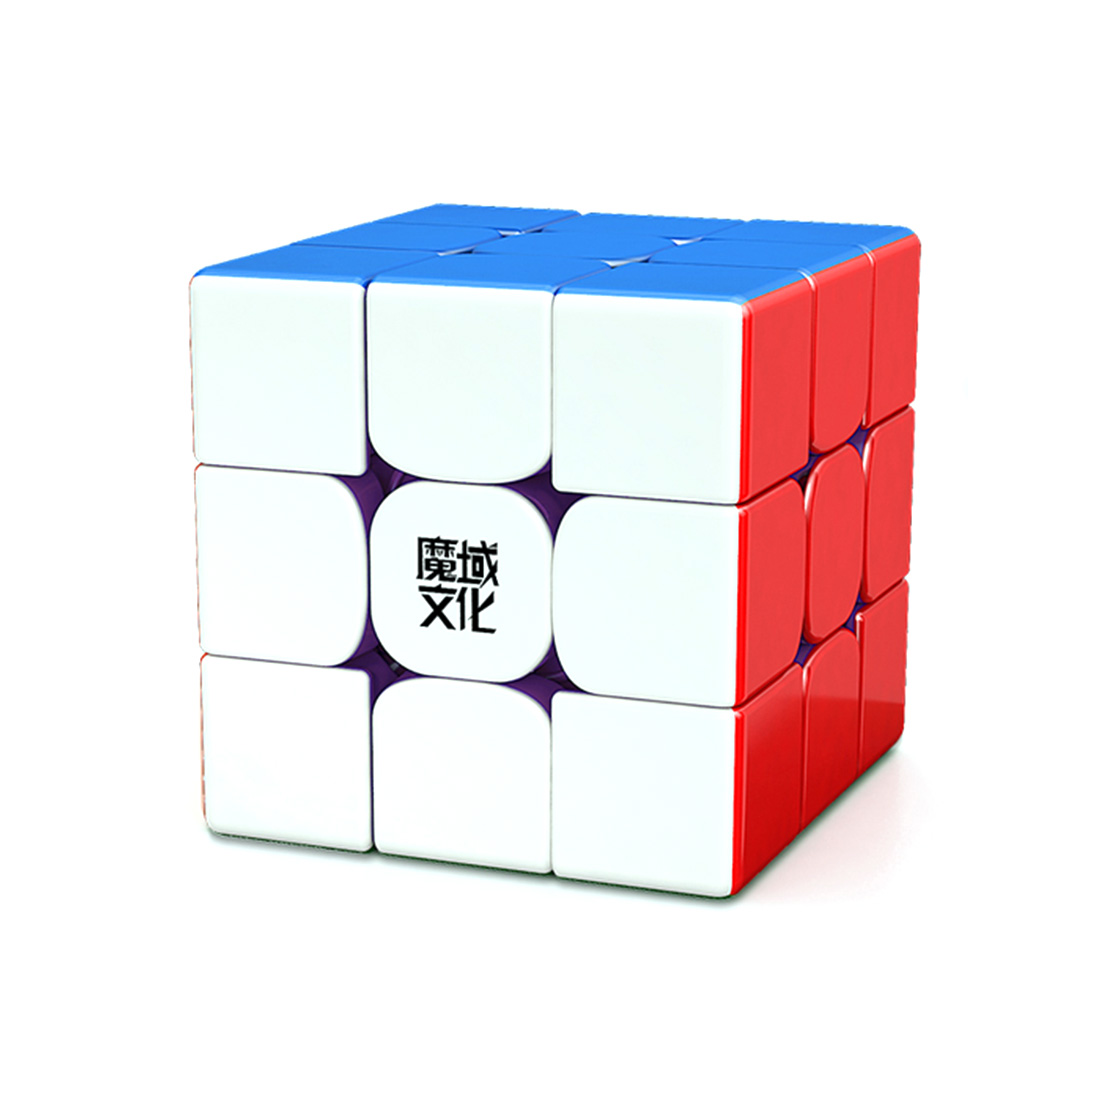 CubersHome MoYu RS3M 3x3 2020 Magnetic Speed Cube